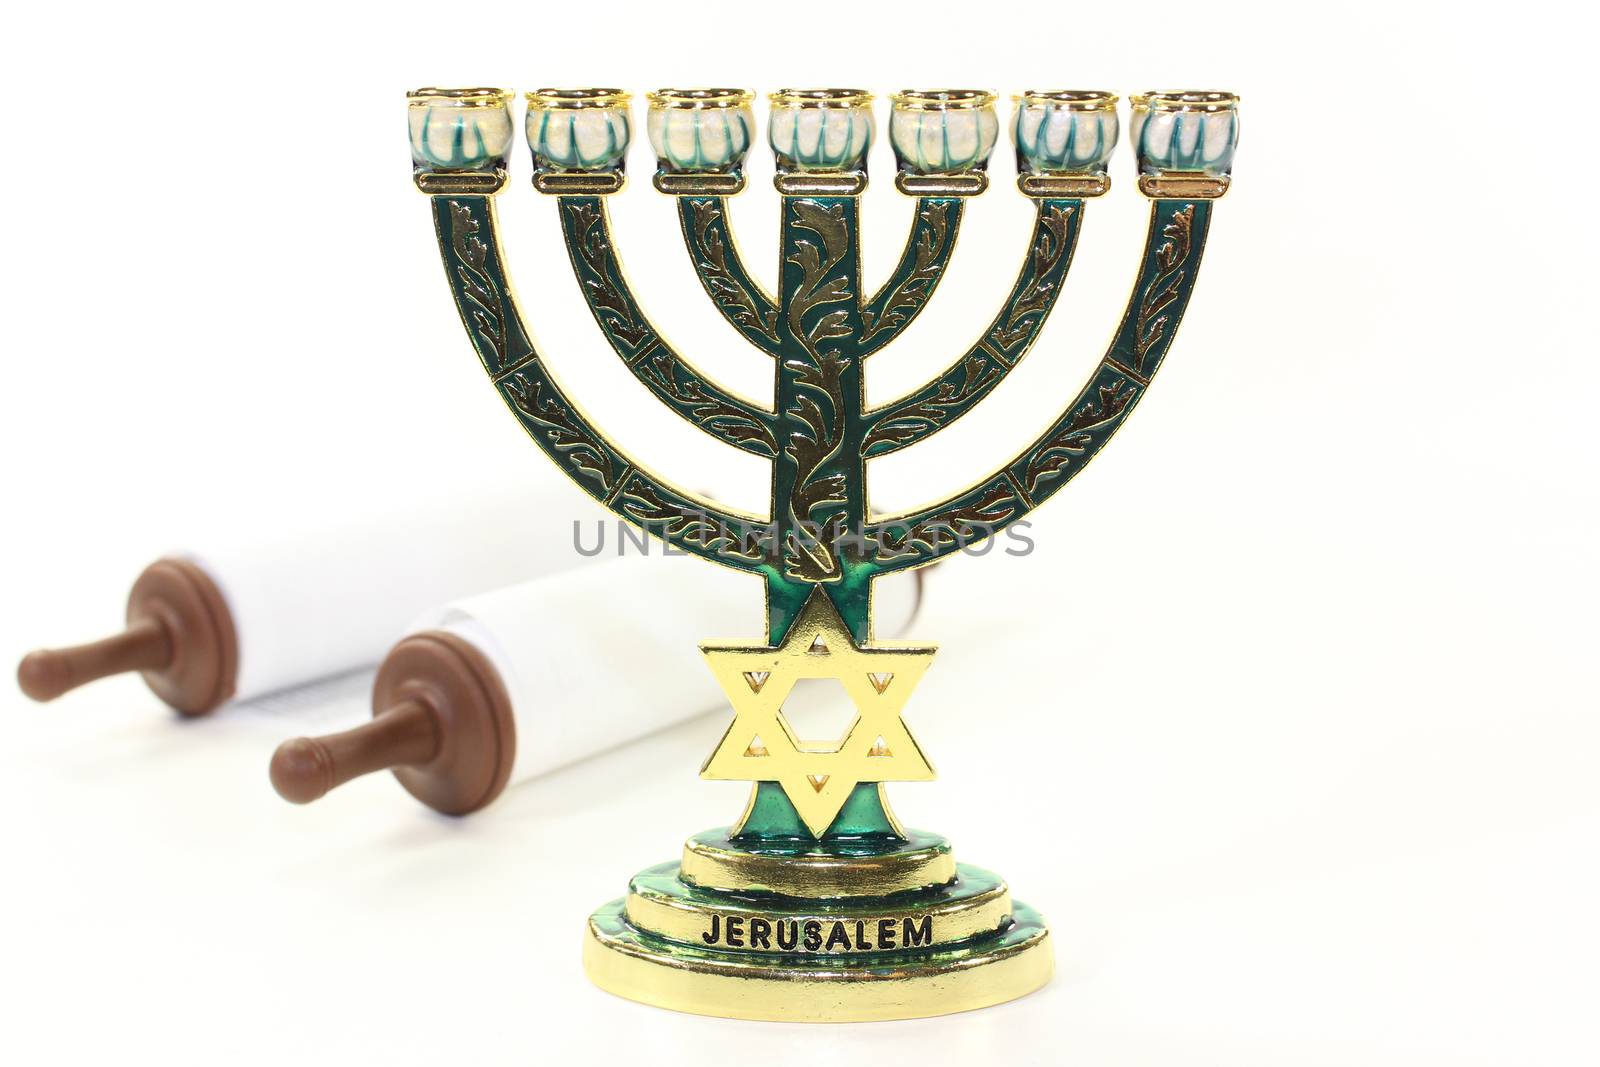 Jewish candlestick and Torah scroll in front of white background